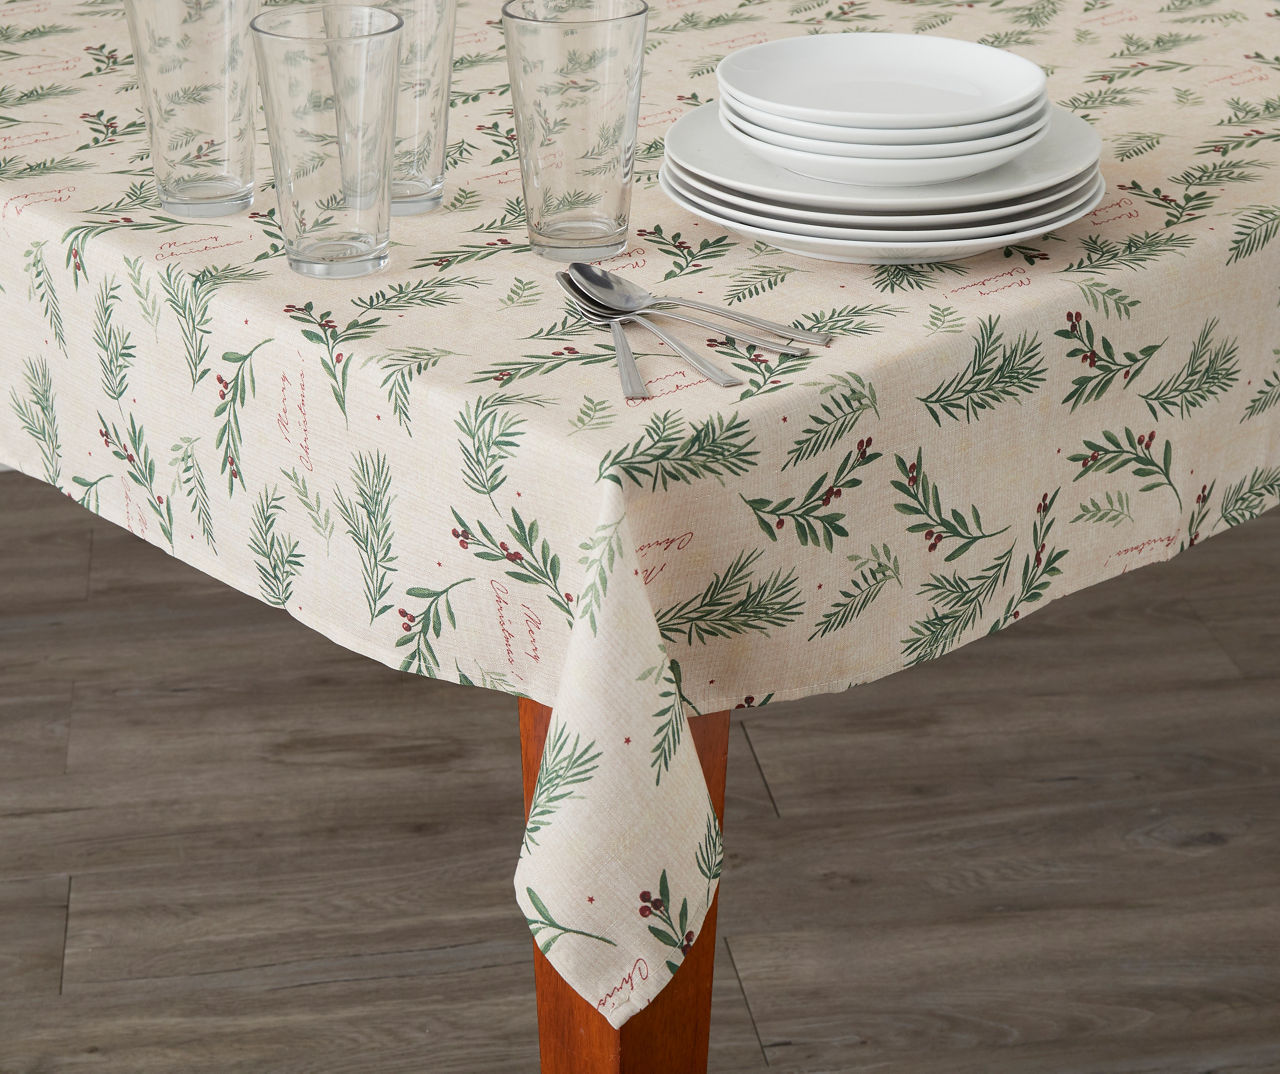 "Merry Christmas" Beige Pine Sprig Tablecloth, (60" x 84")